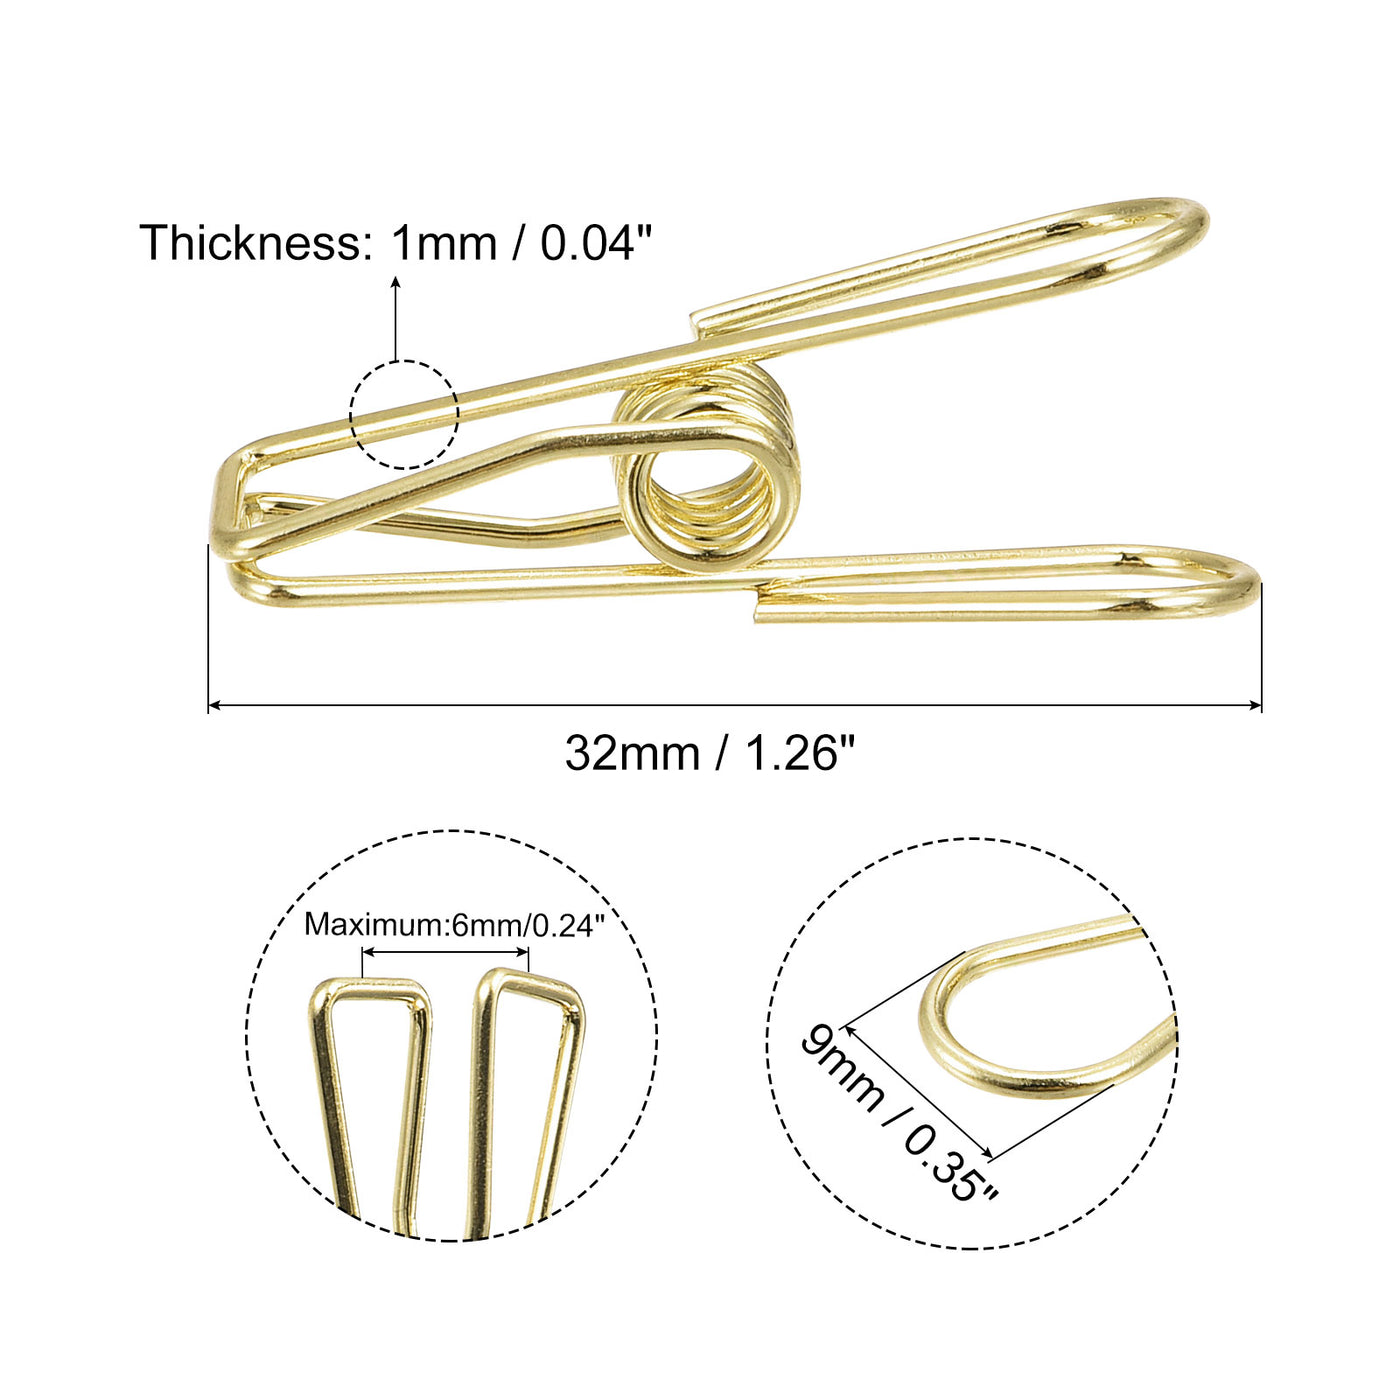 uxcell Uxcell Tablecloth Clips, 32mm Carbon Steel Clamps for Fixing Table Cloth, Gold 16 Pcs